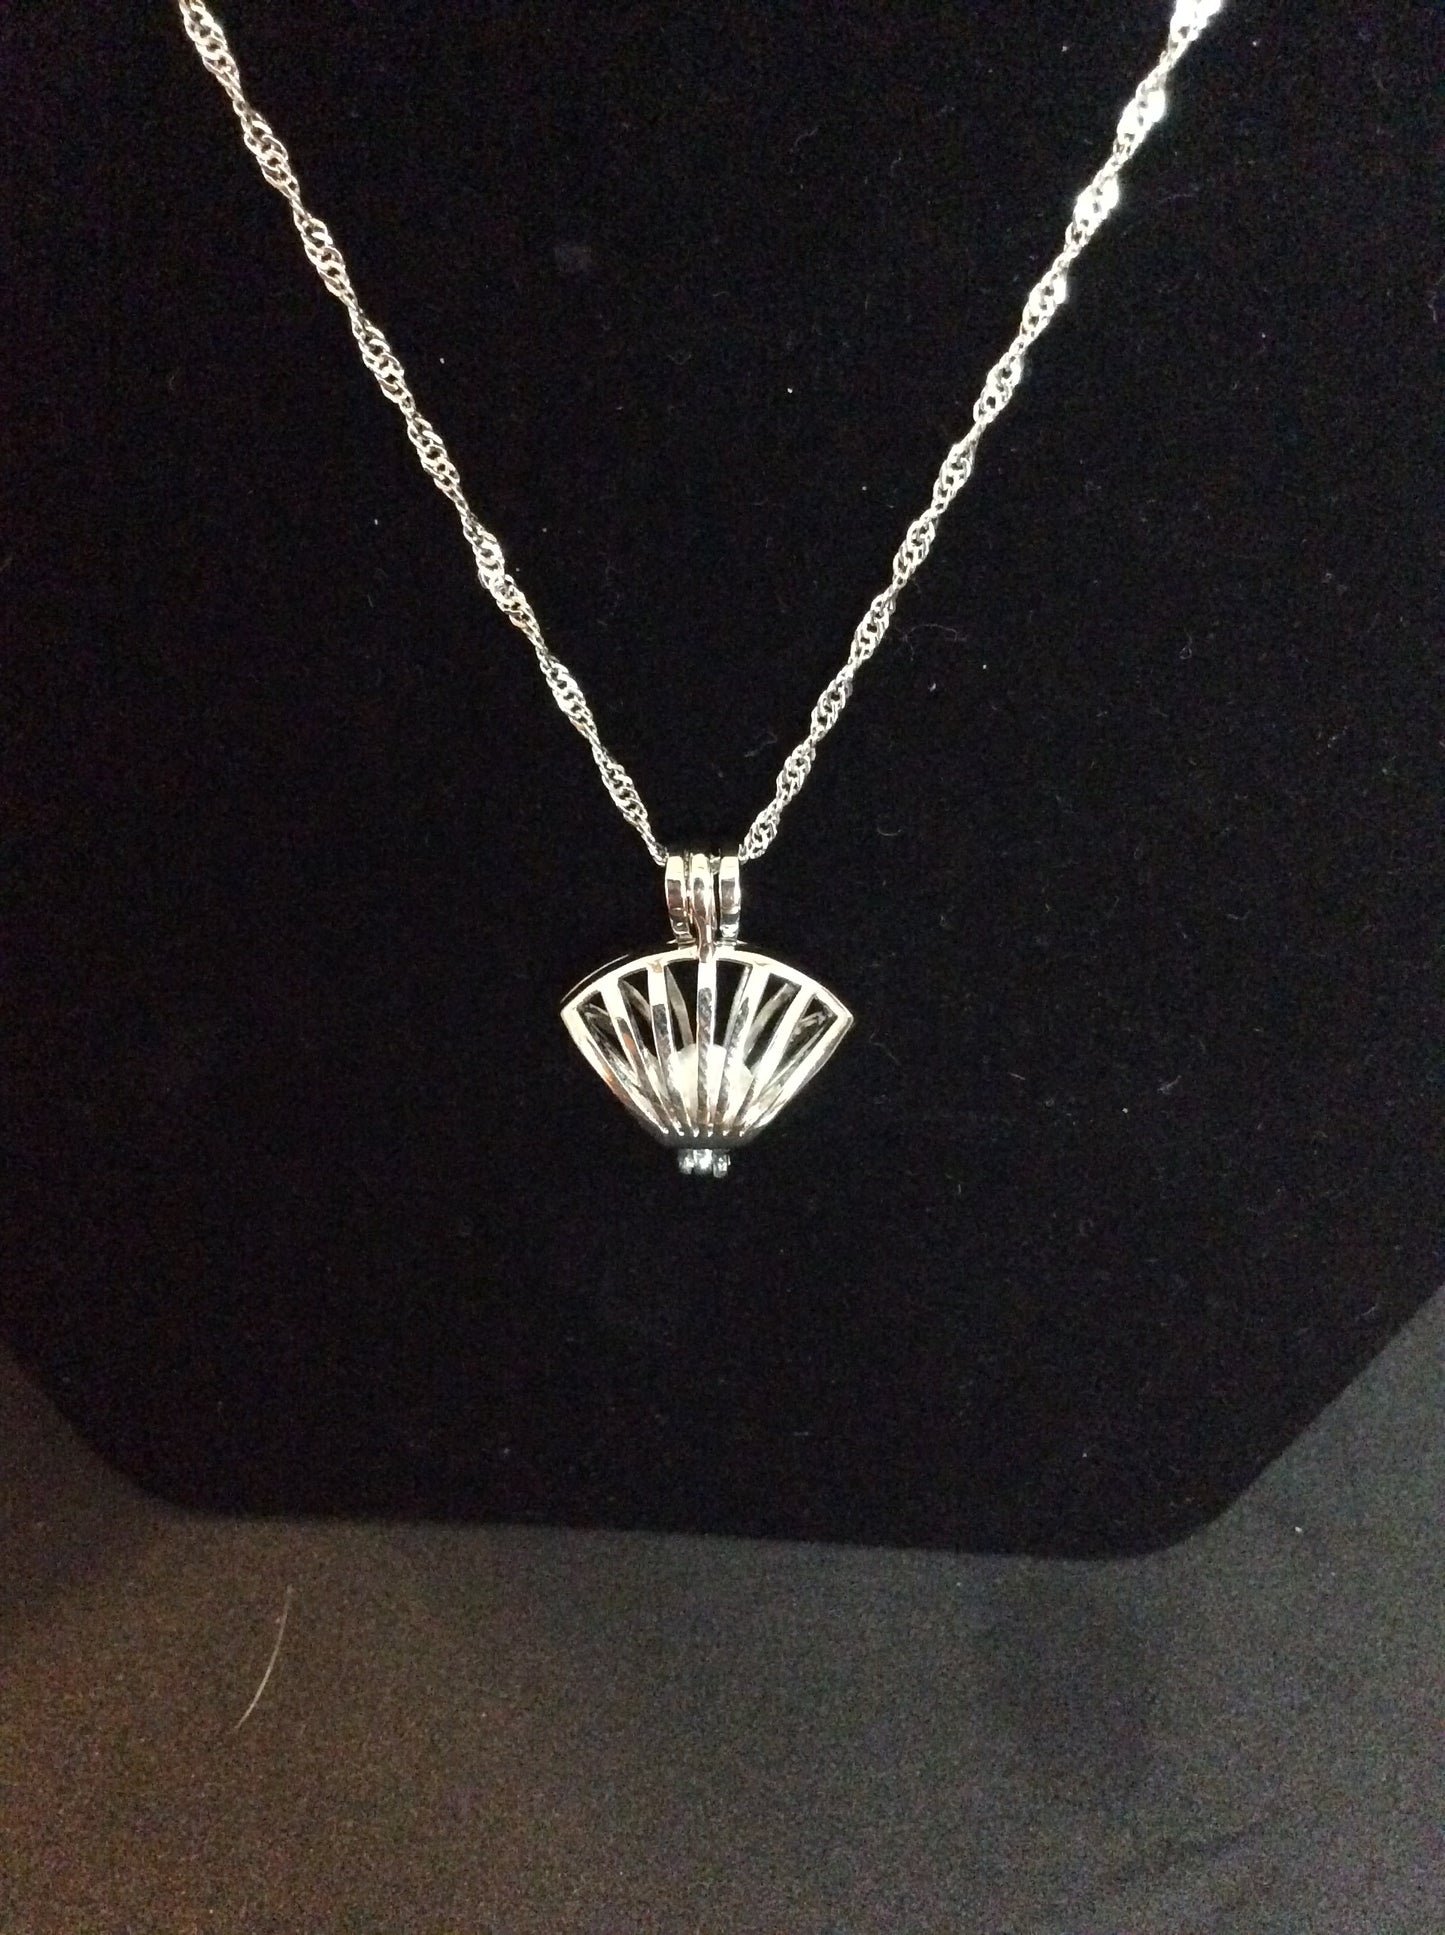 Package Deal: Oyster, Necklace Pendant w/ chain (Coming Soon!!)